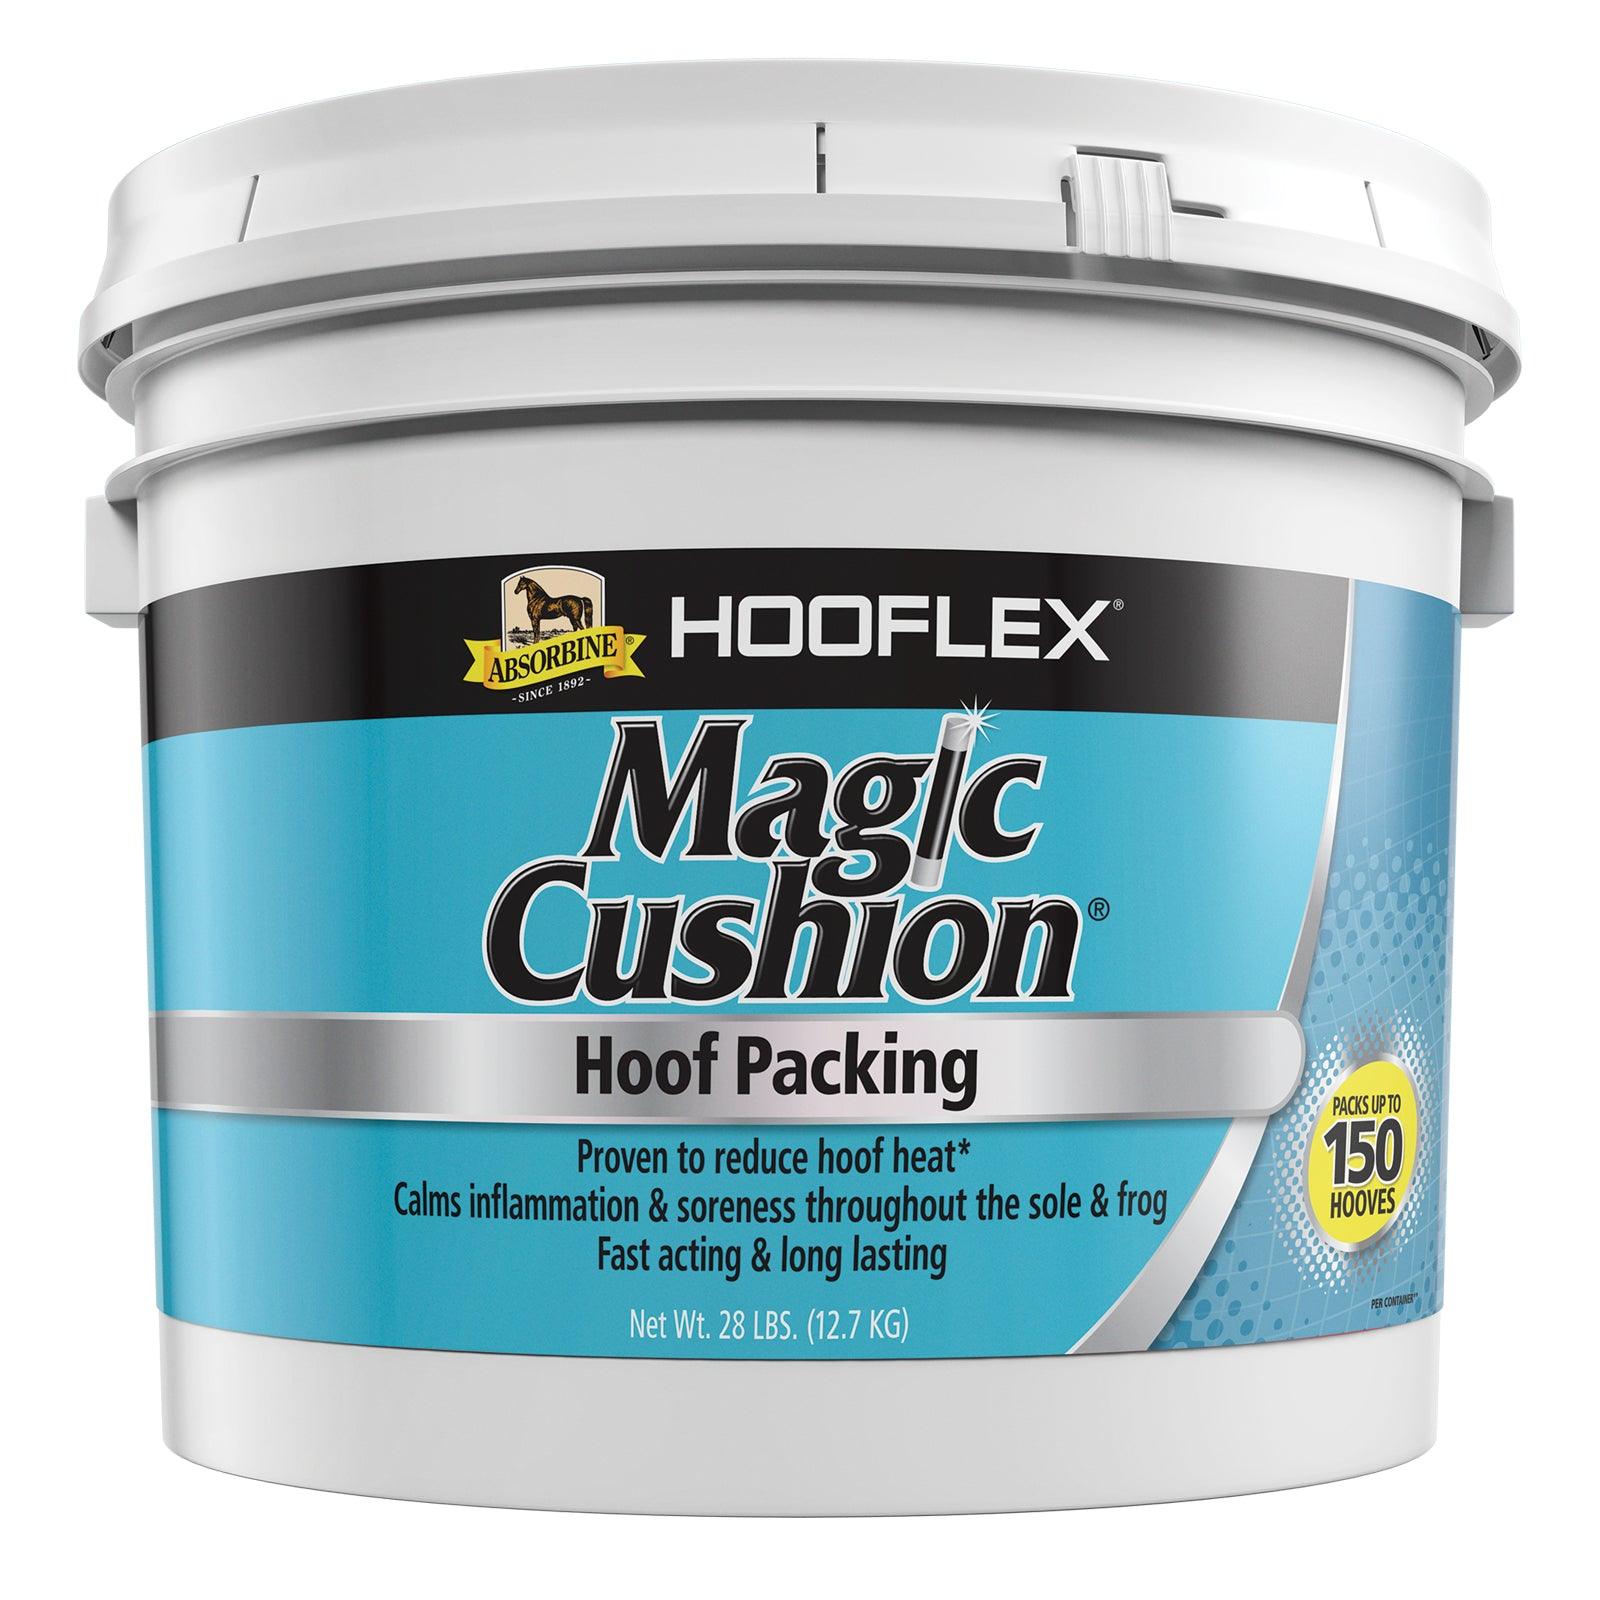 Magic Cushion Hoof Packing. Proven to reduce hoof heat. Calms inflammation & soreness throughout the sole & frog. Fast acting, long lasting. Net weight 28 pound bucket.